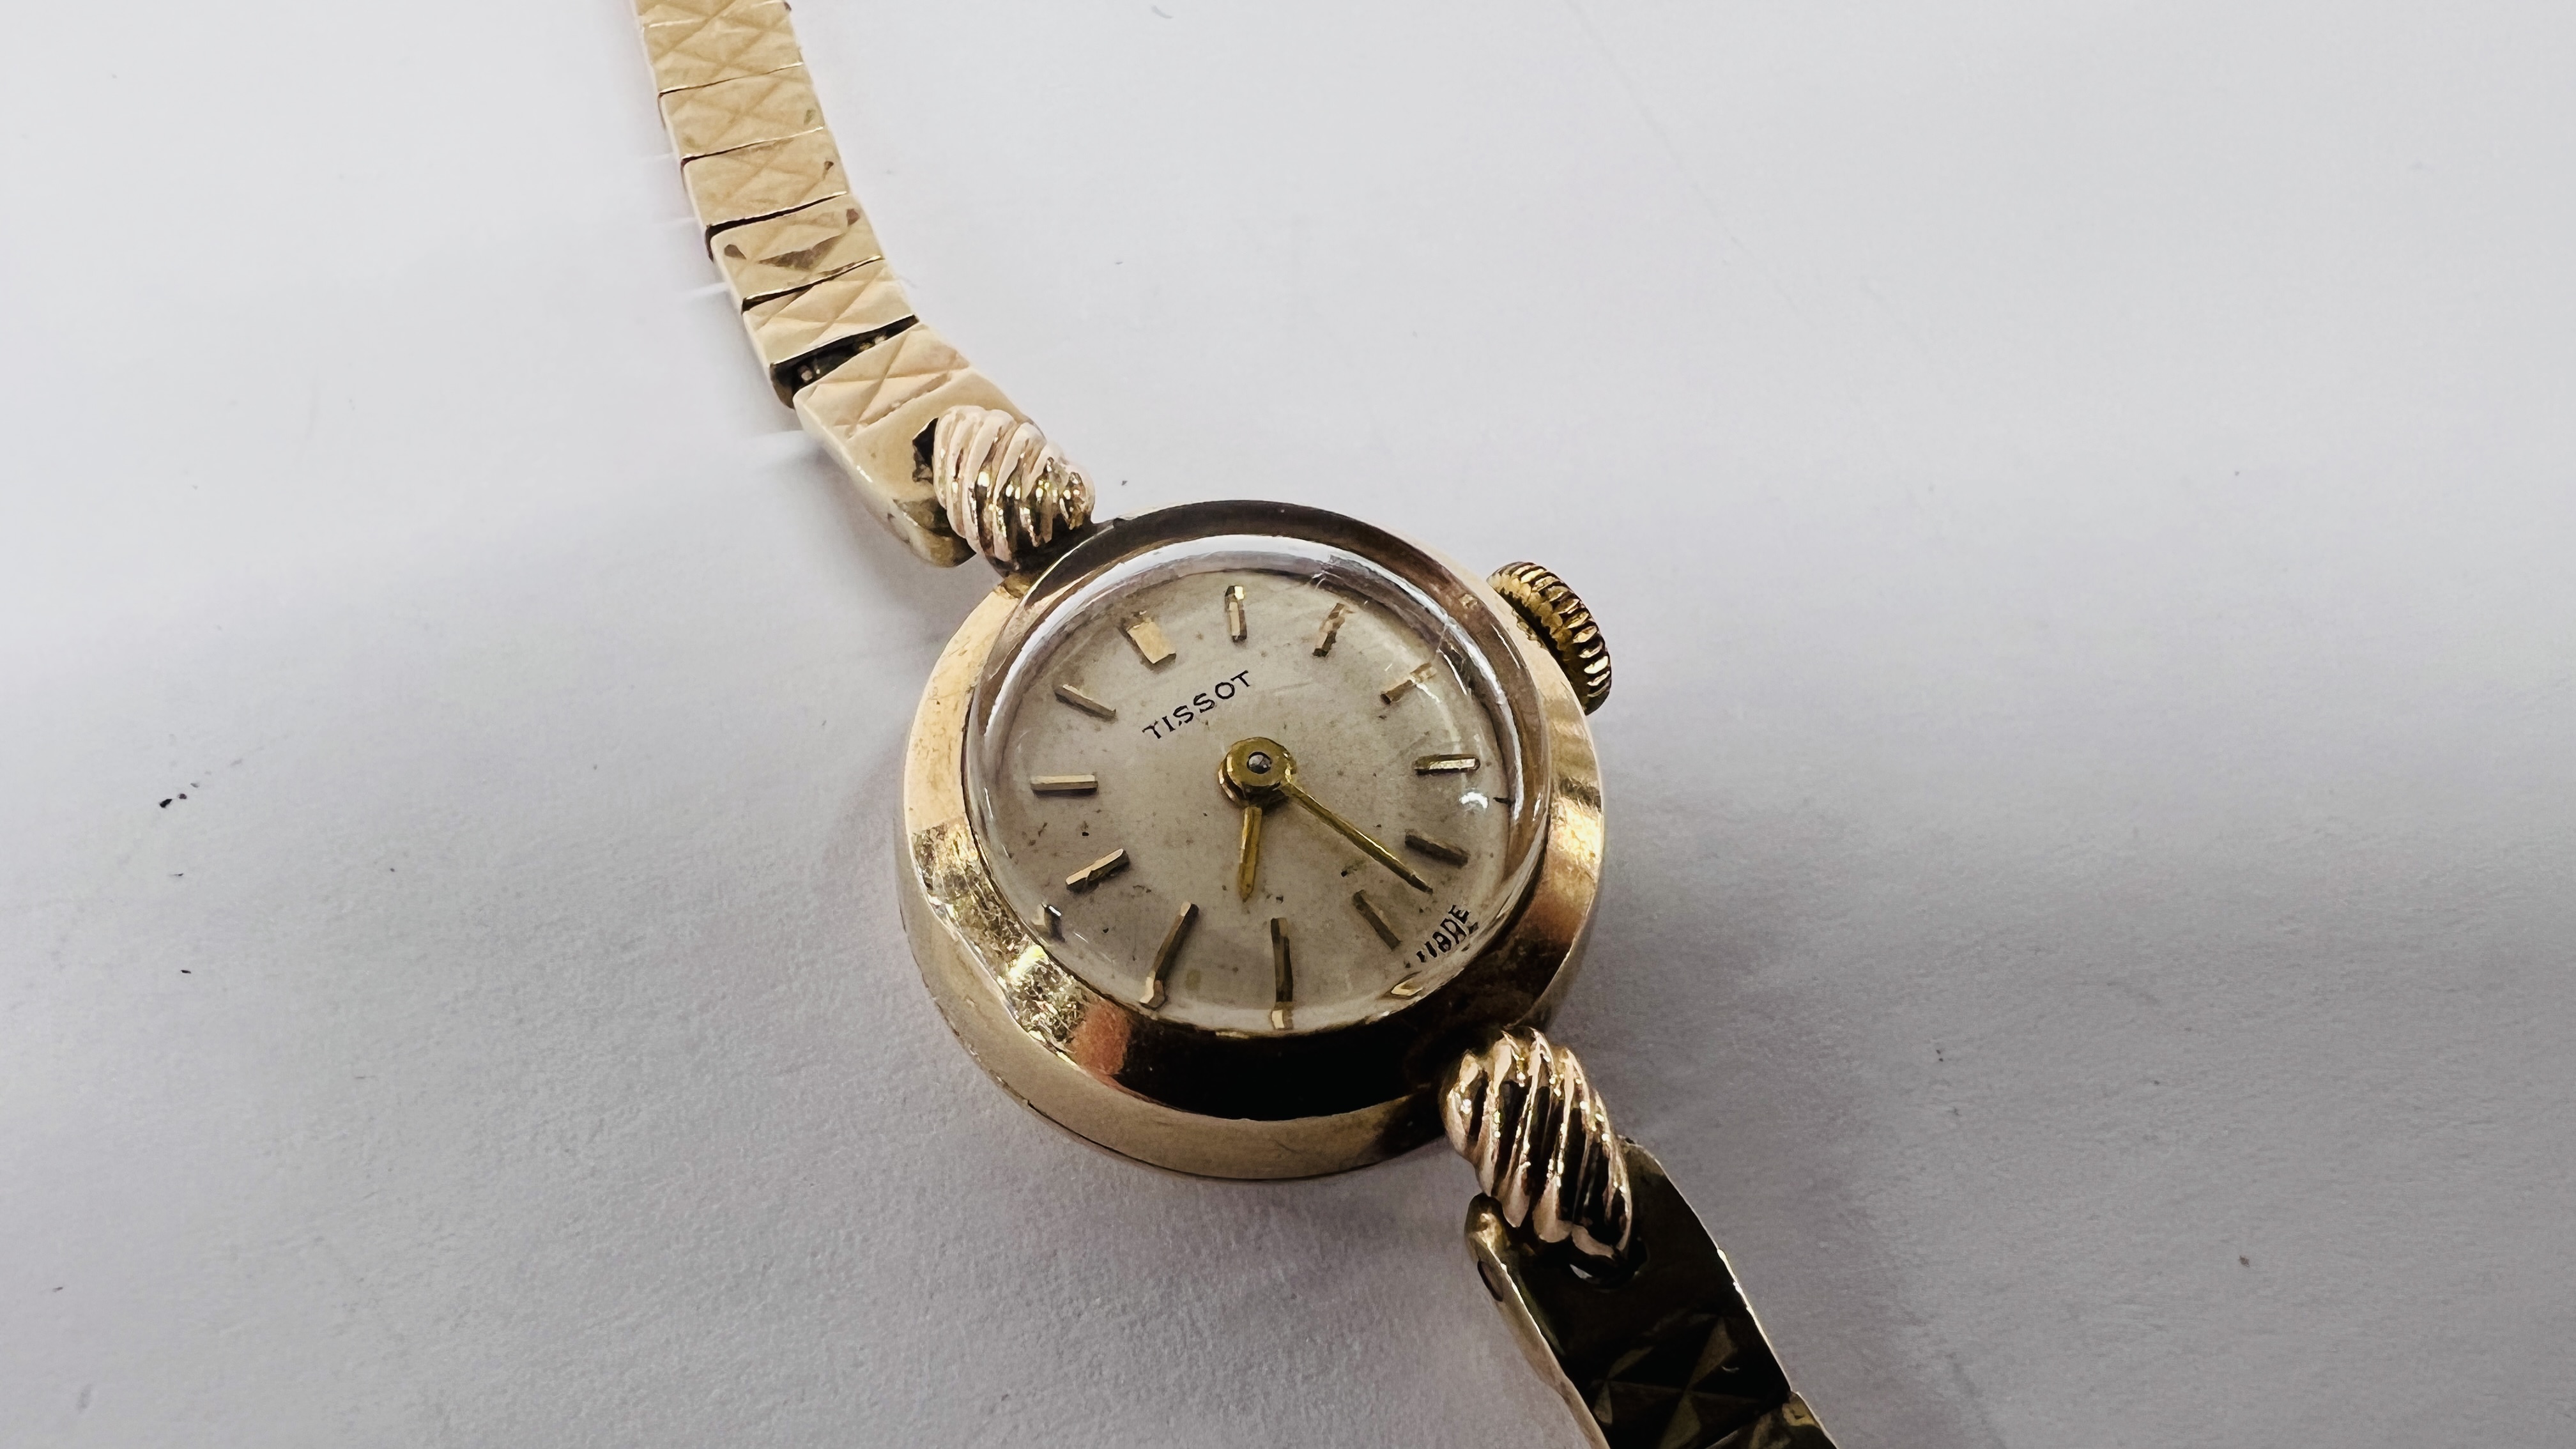 A LADY'S 9CT GOLD TISSOT WRISTWATCH WITH BATON NUMERALS, ON A 9CT GOLD BRACELET. - Image 7 of 13